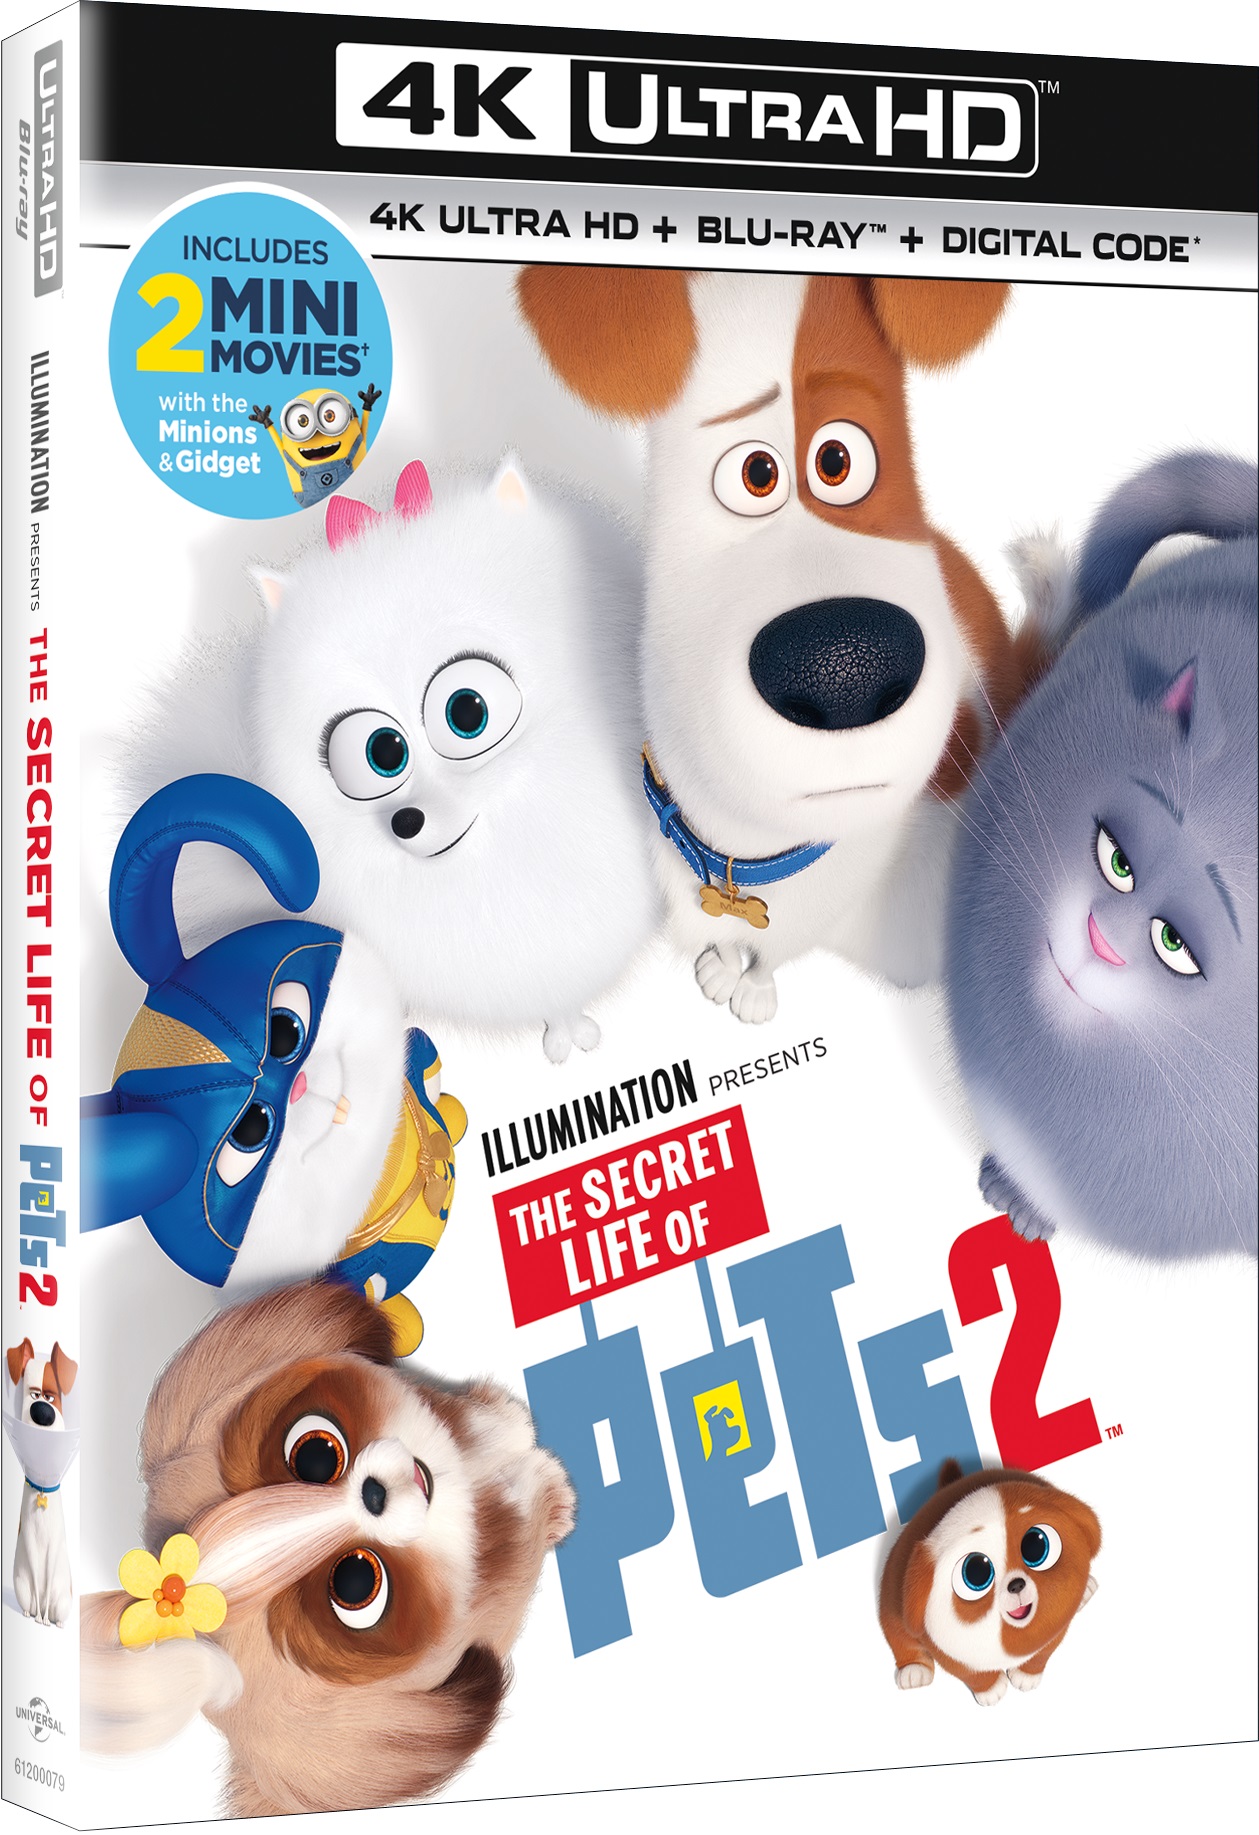 'The Secret Life Of Pets 2'; Arrives On Digital August 13 & On 4K Ultra HD, Blu-ray & DVD August 27, 2019 From Illumination & Universal 2